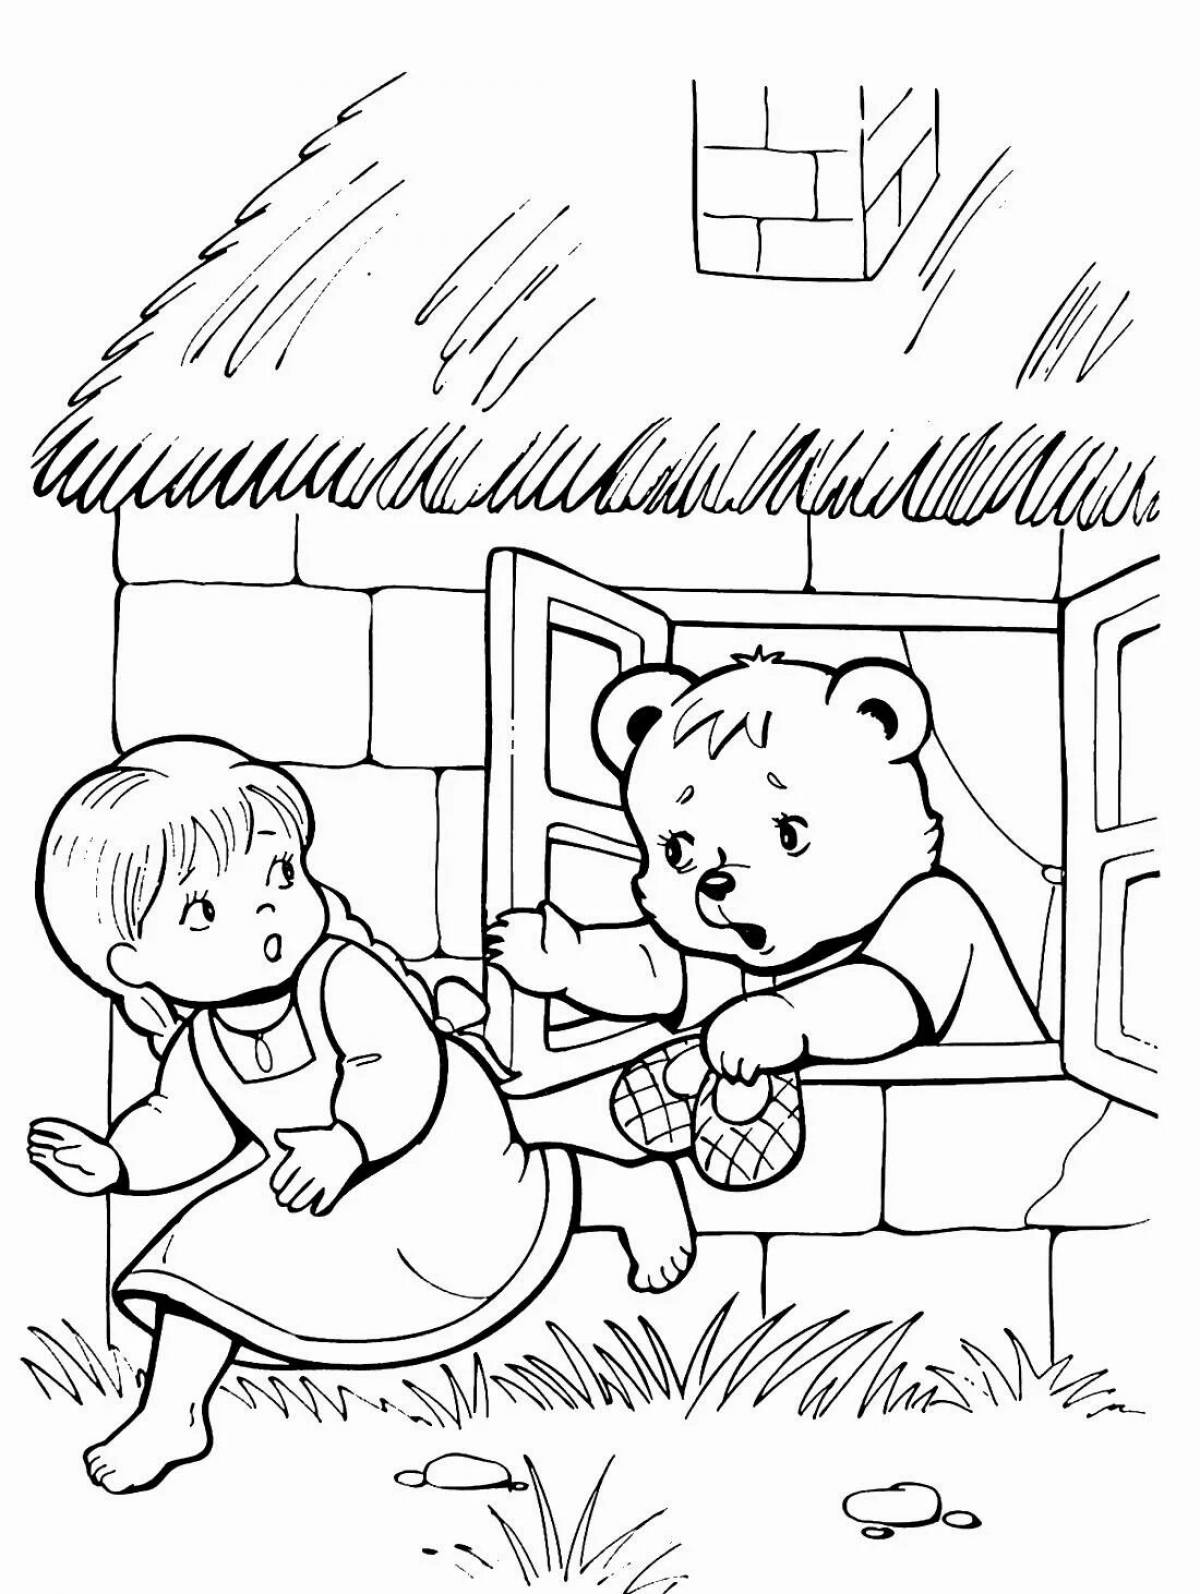 Witty three bears coloring pages